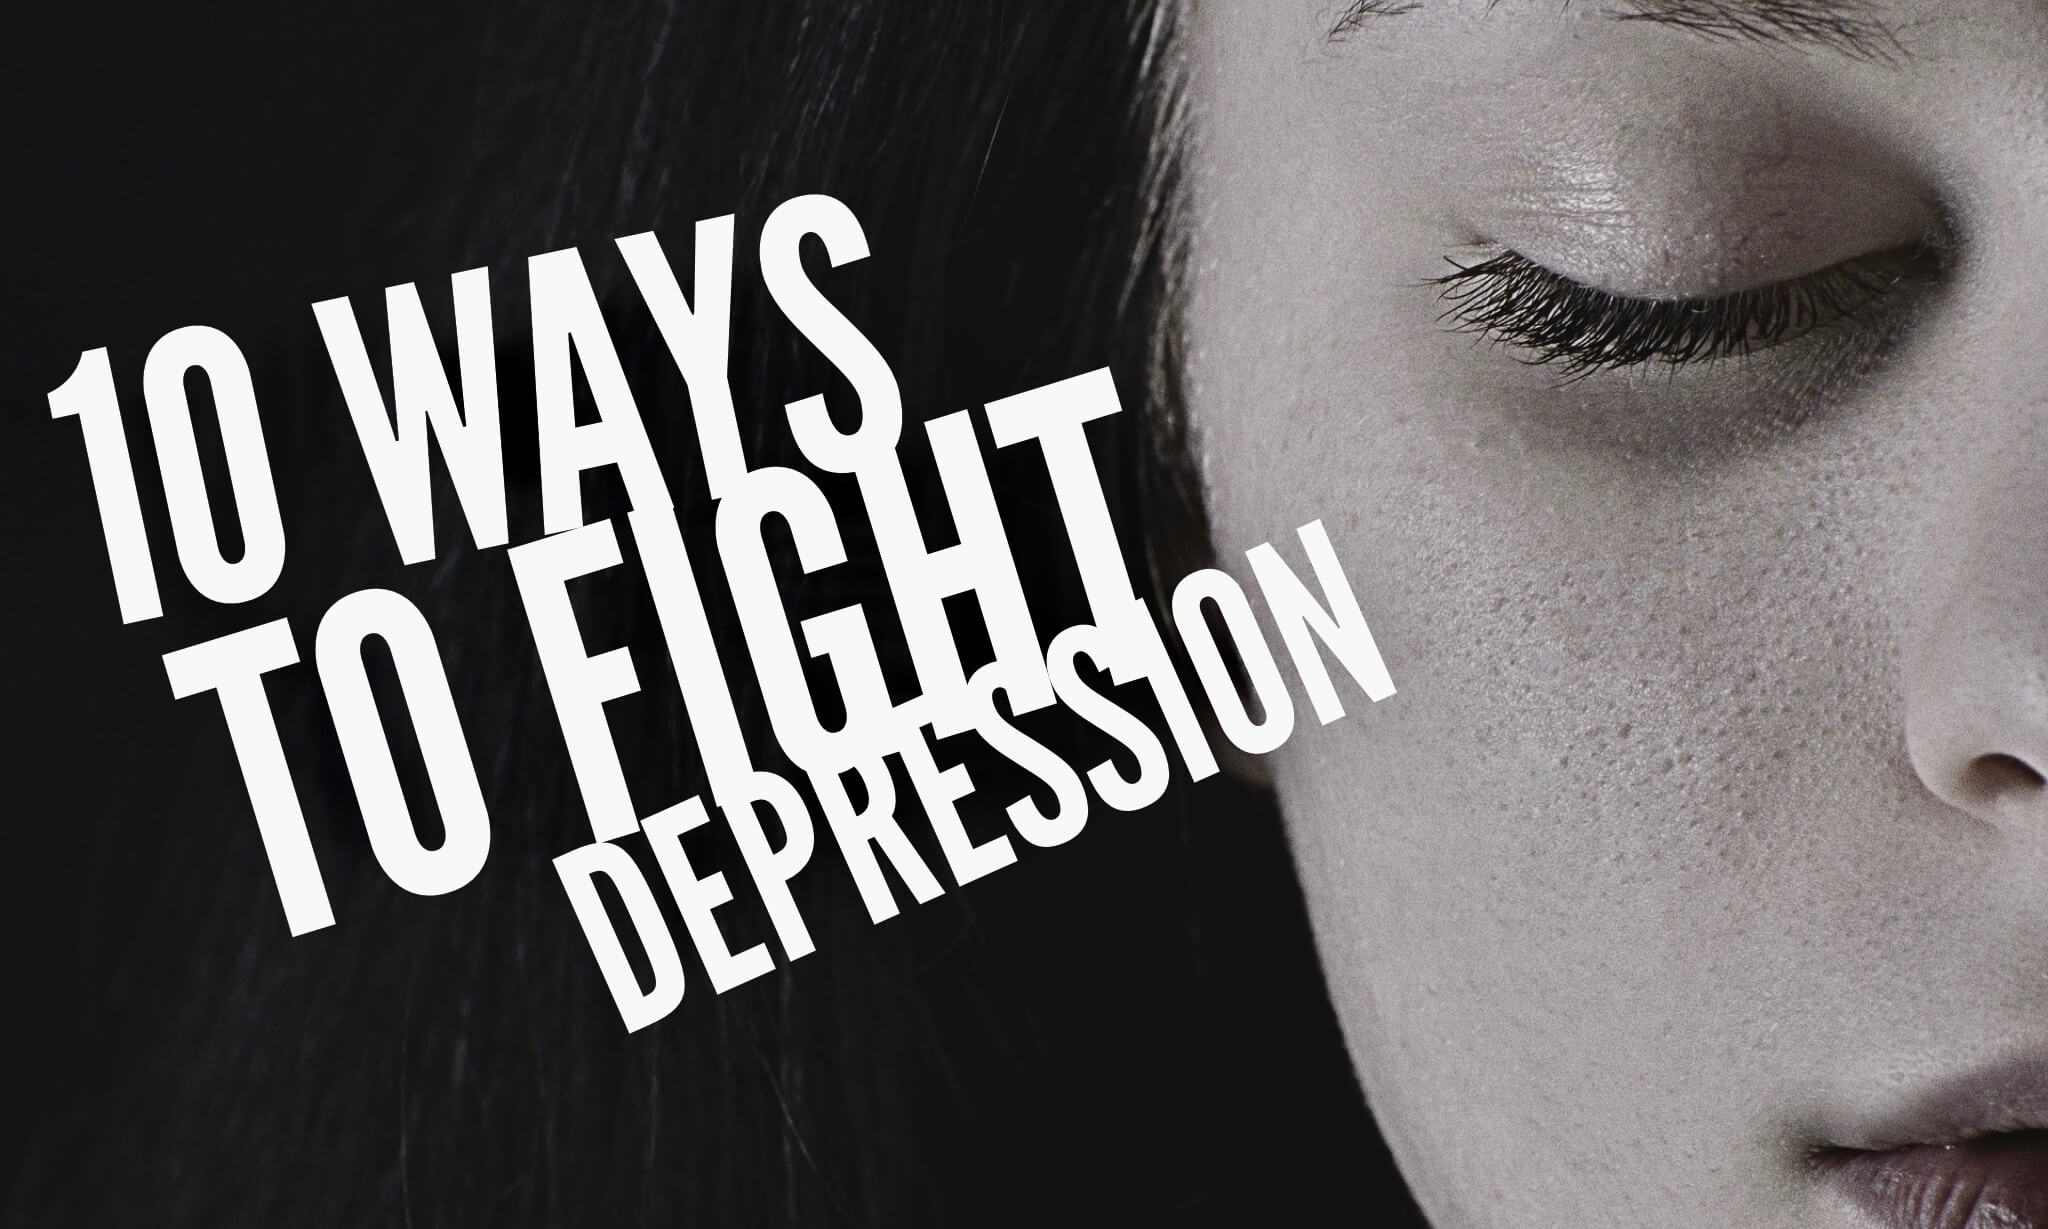 how can Christians fight depression?